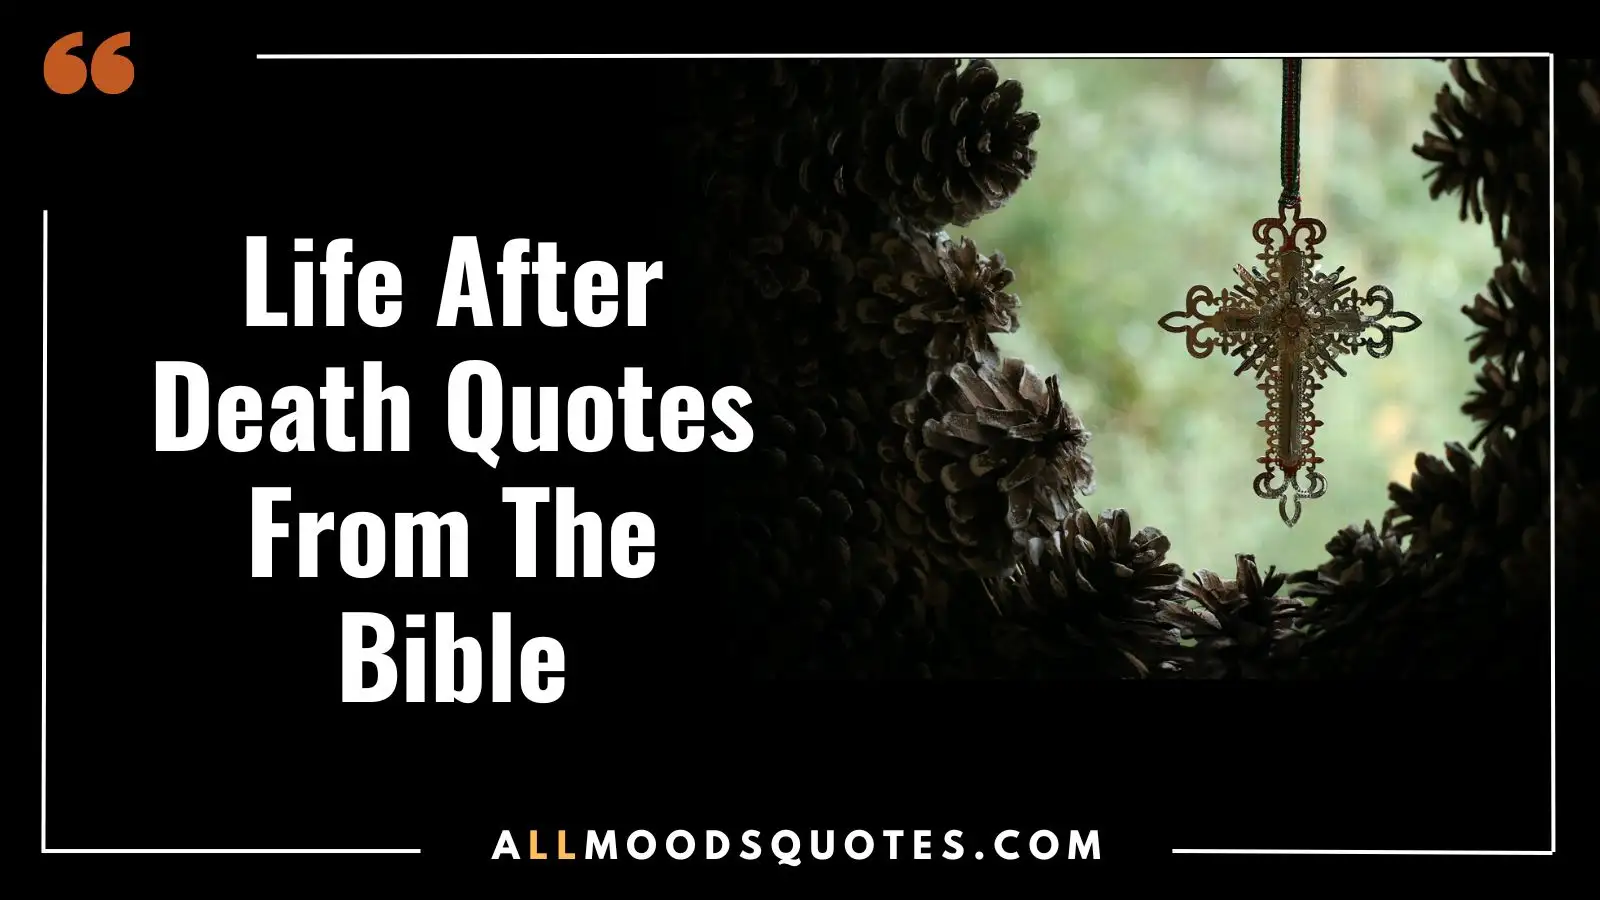 Life after Death Quotes Bible (1)